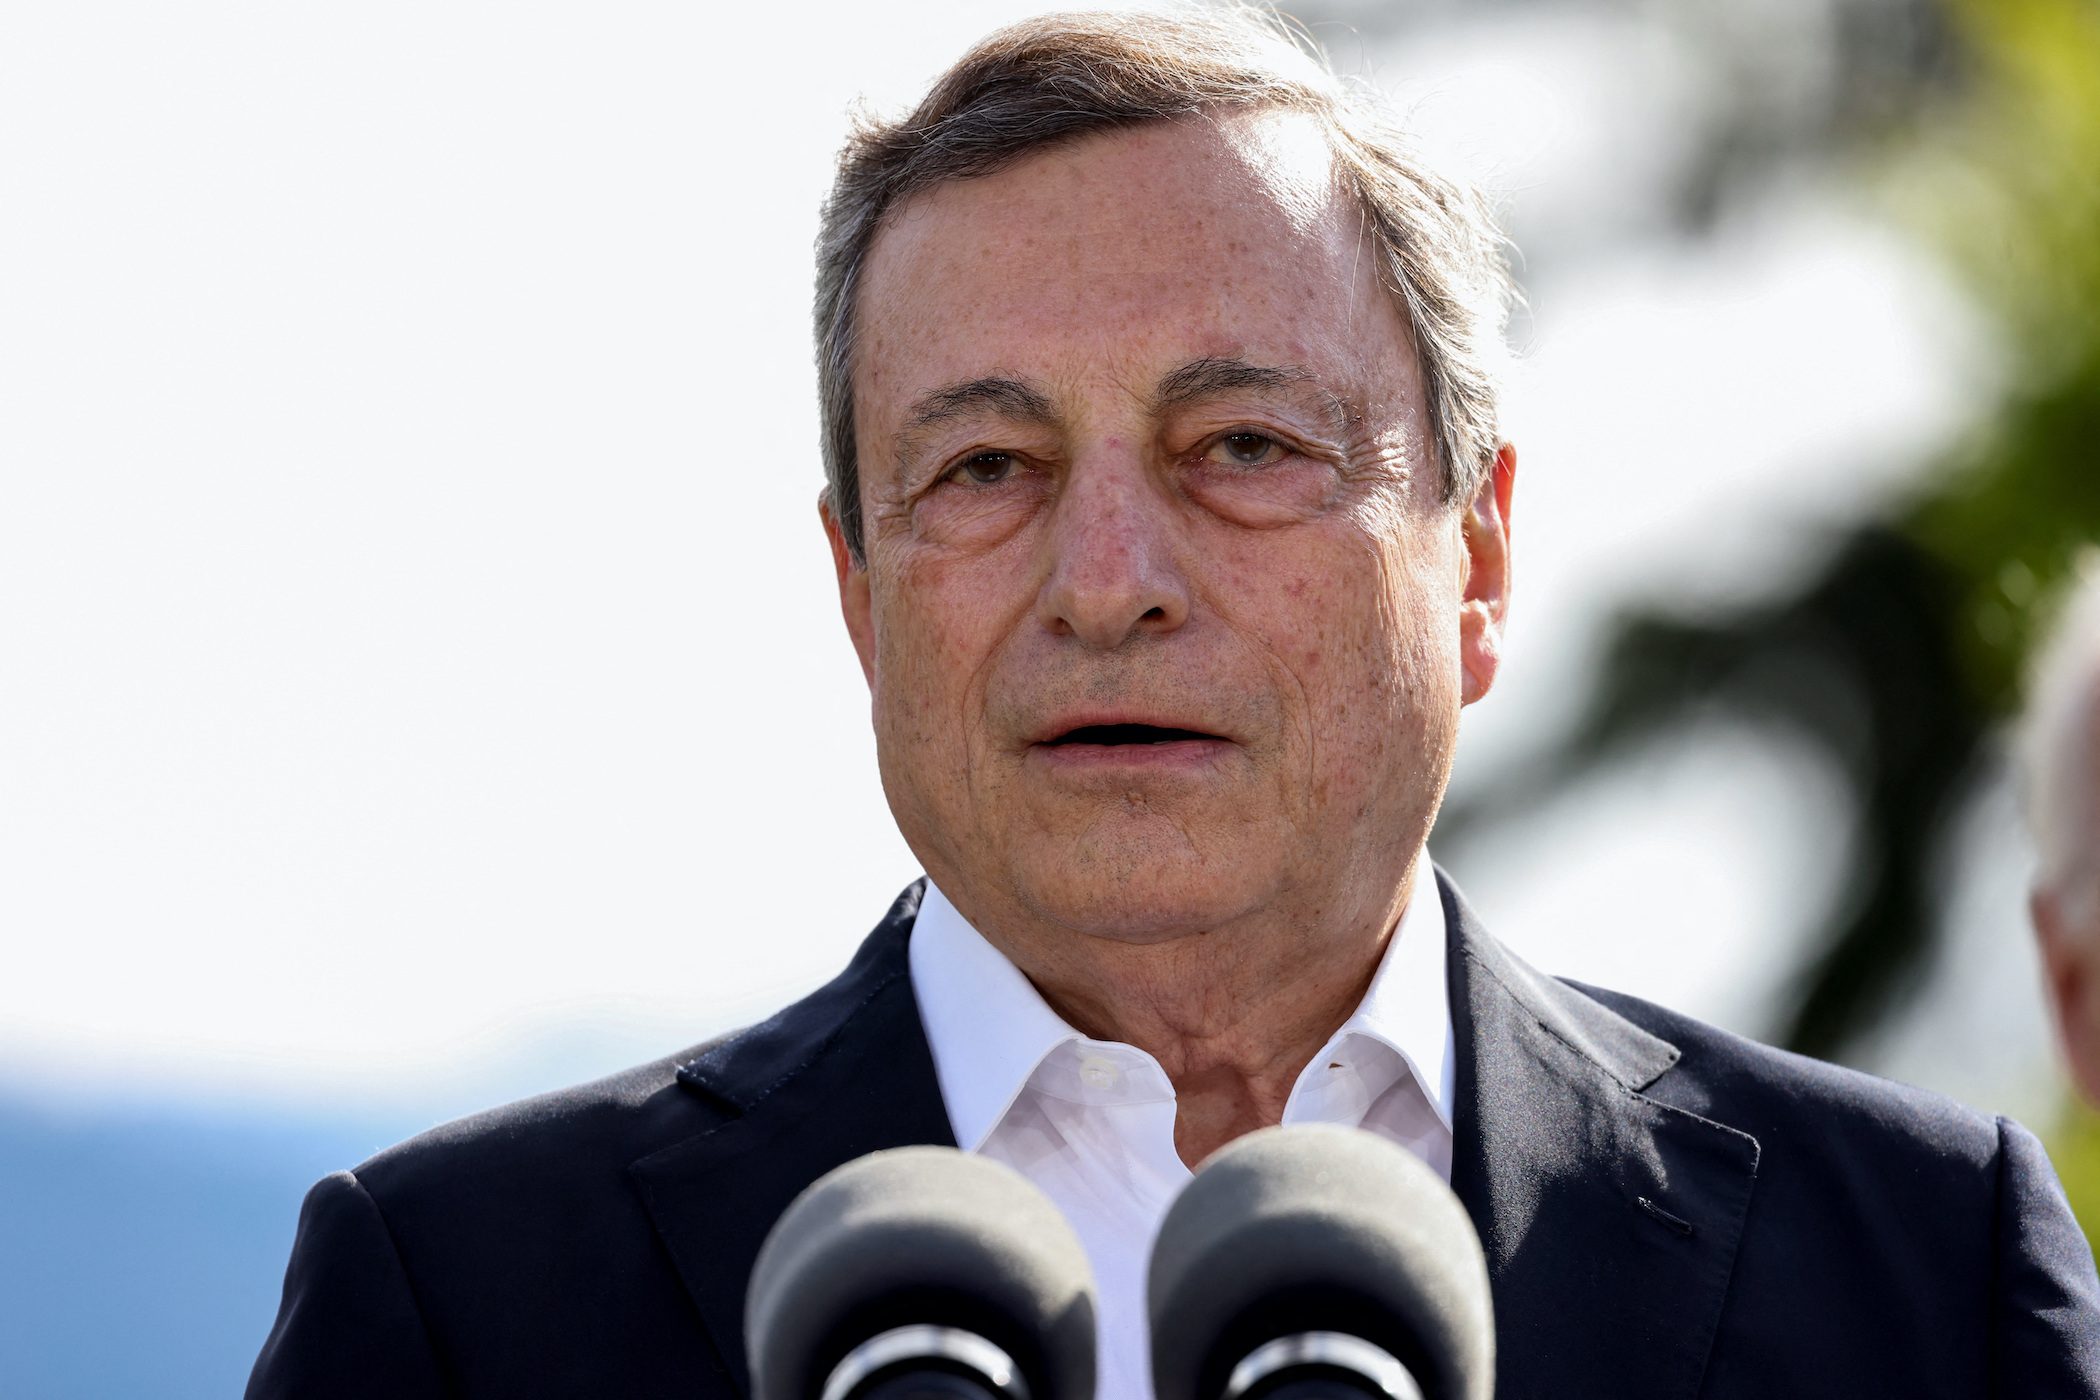 10 years on, Italy faces debt crisis Draghi may not solve